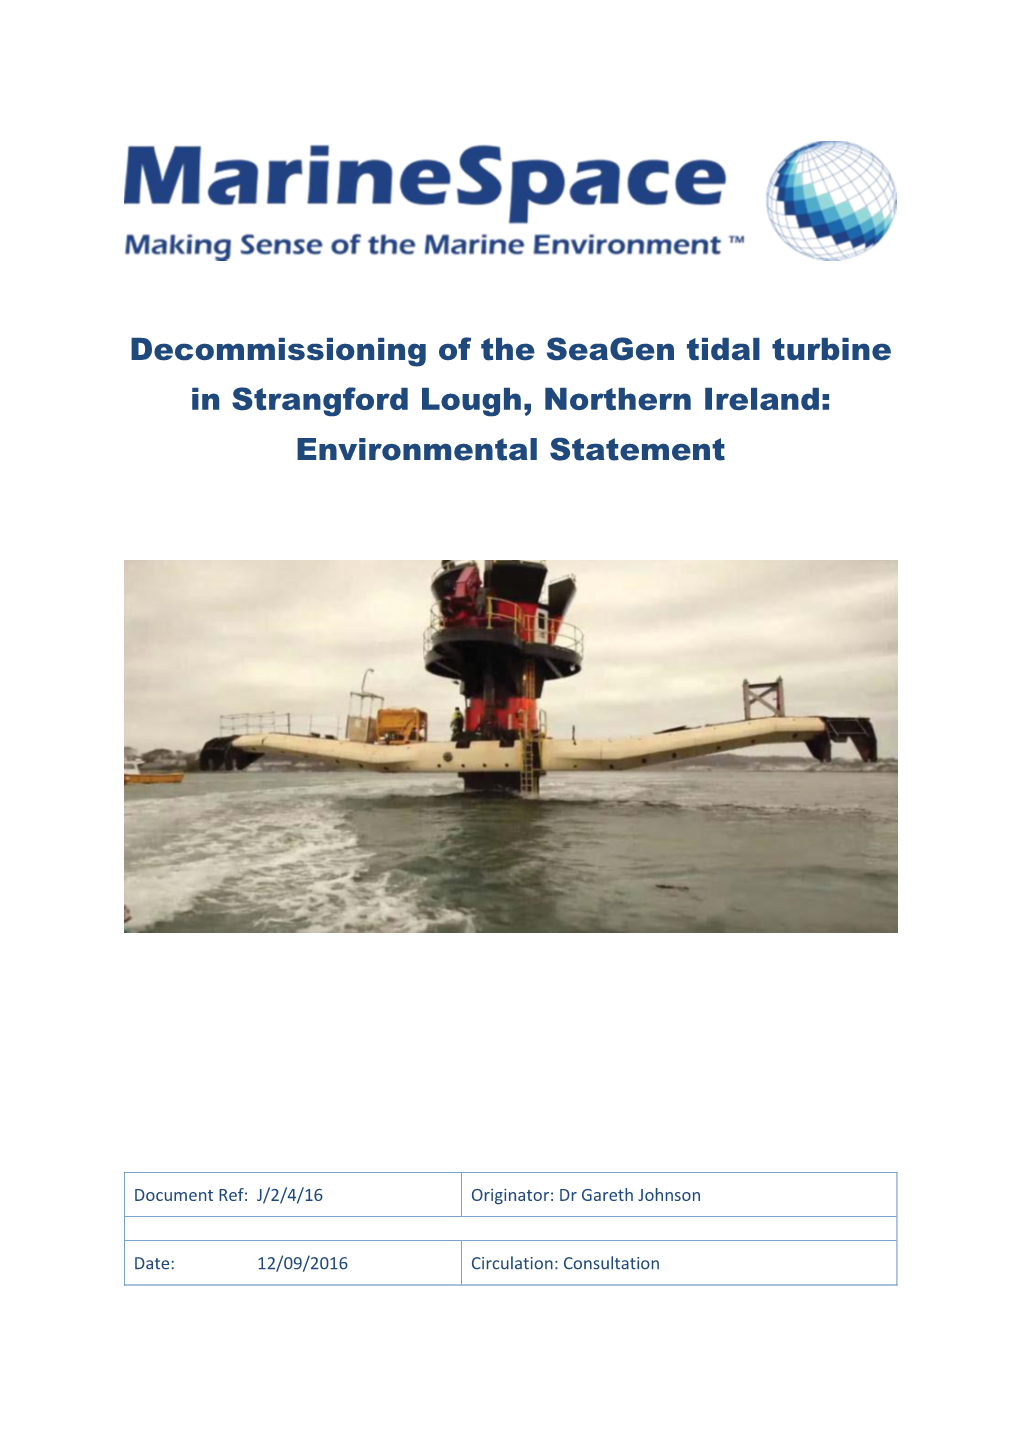 Decommissioning of the Seagen Tidal Turbine in Strangford Lough, Northern Ireland: Environmental Statement